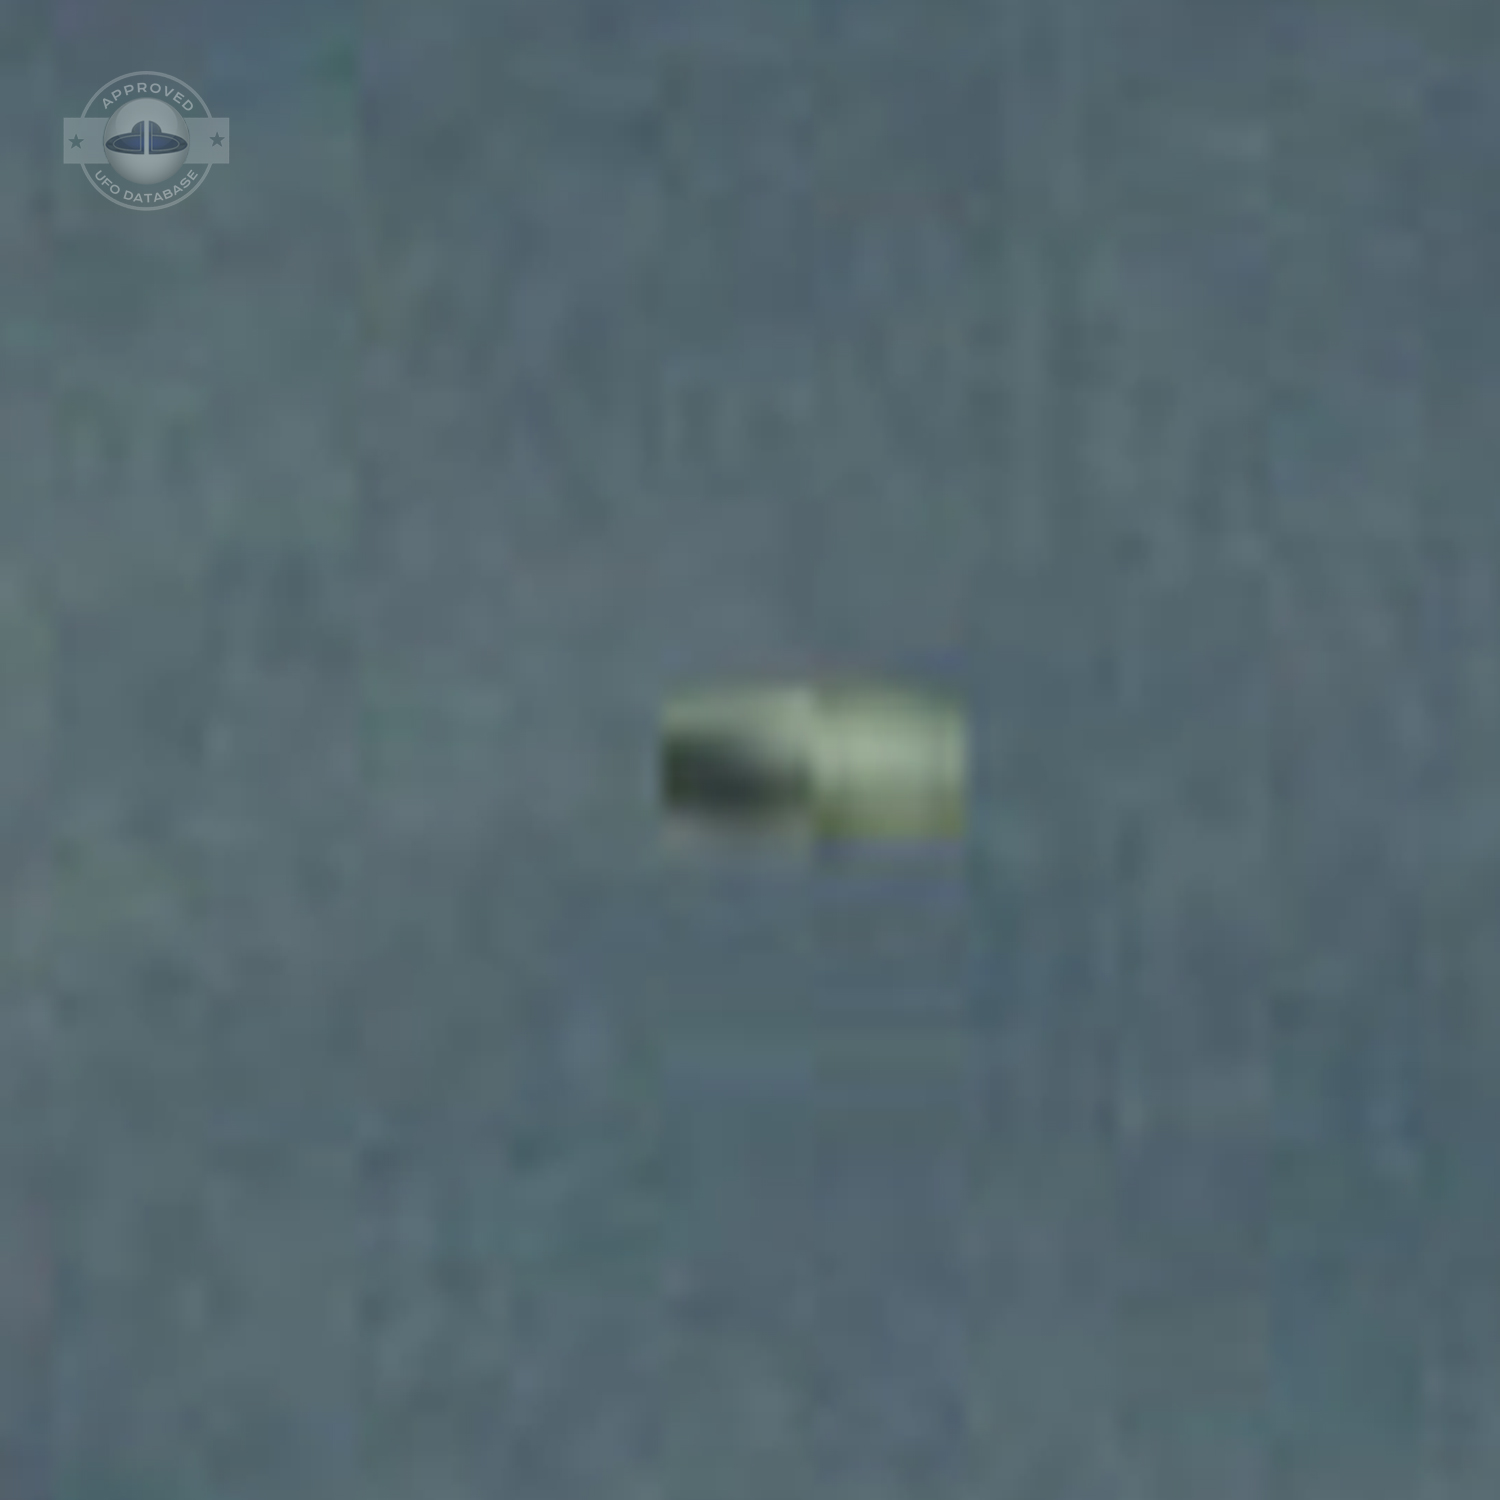 UFO Faster than anything on Earth caught on Video frame | Germany 2011 UFO Picture #213-5